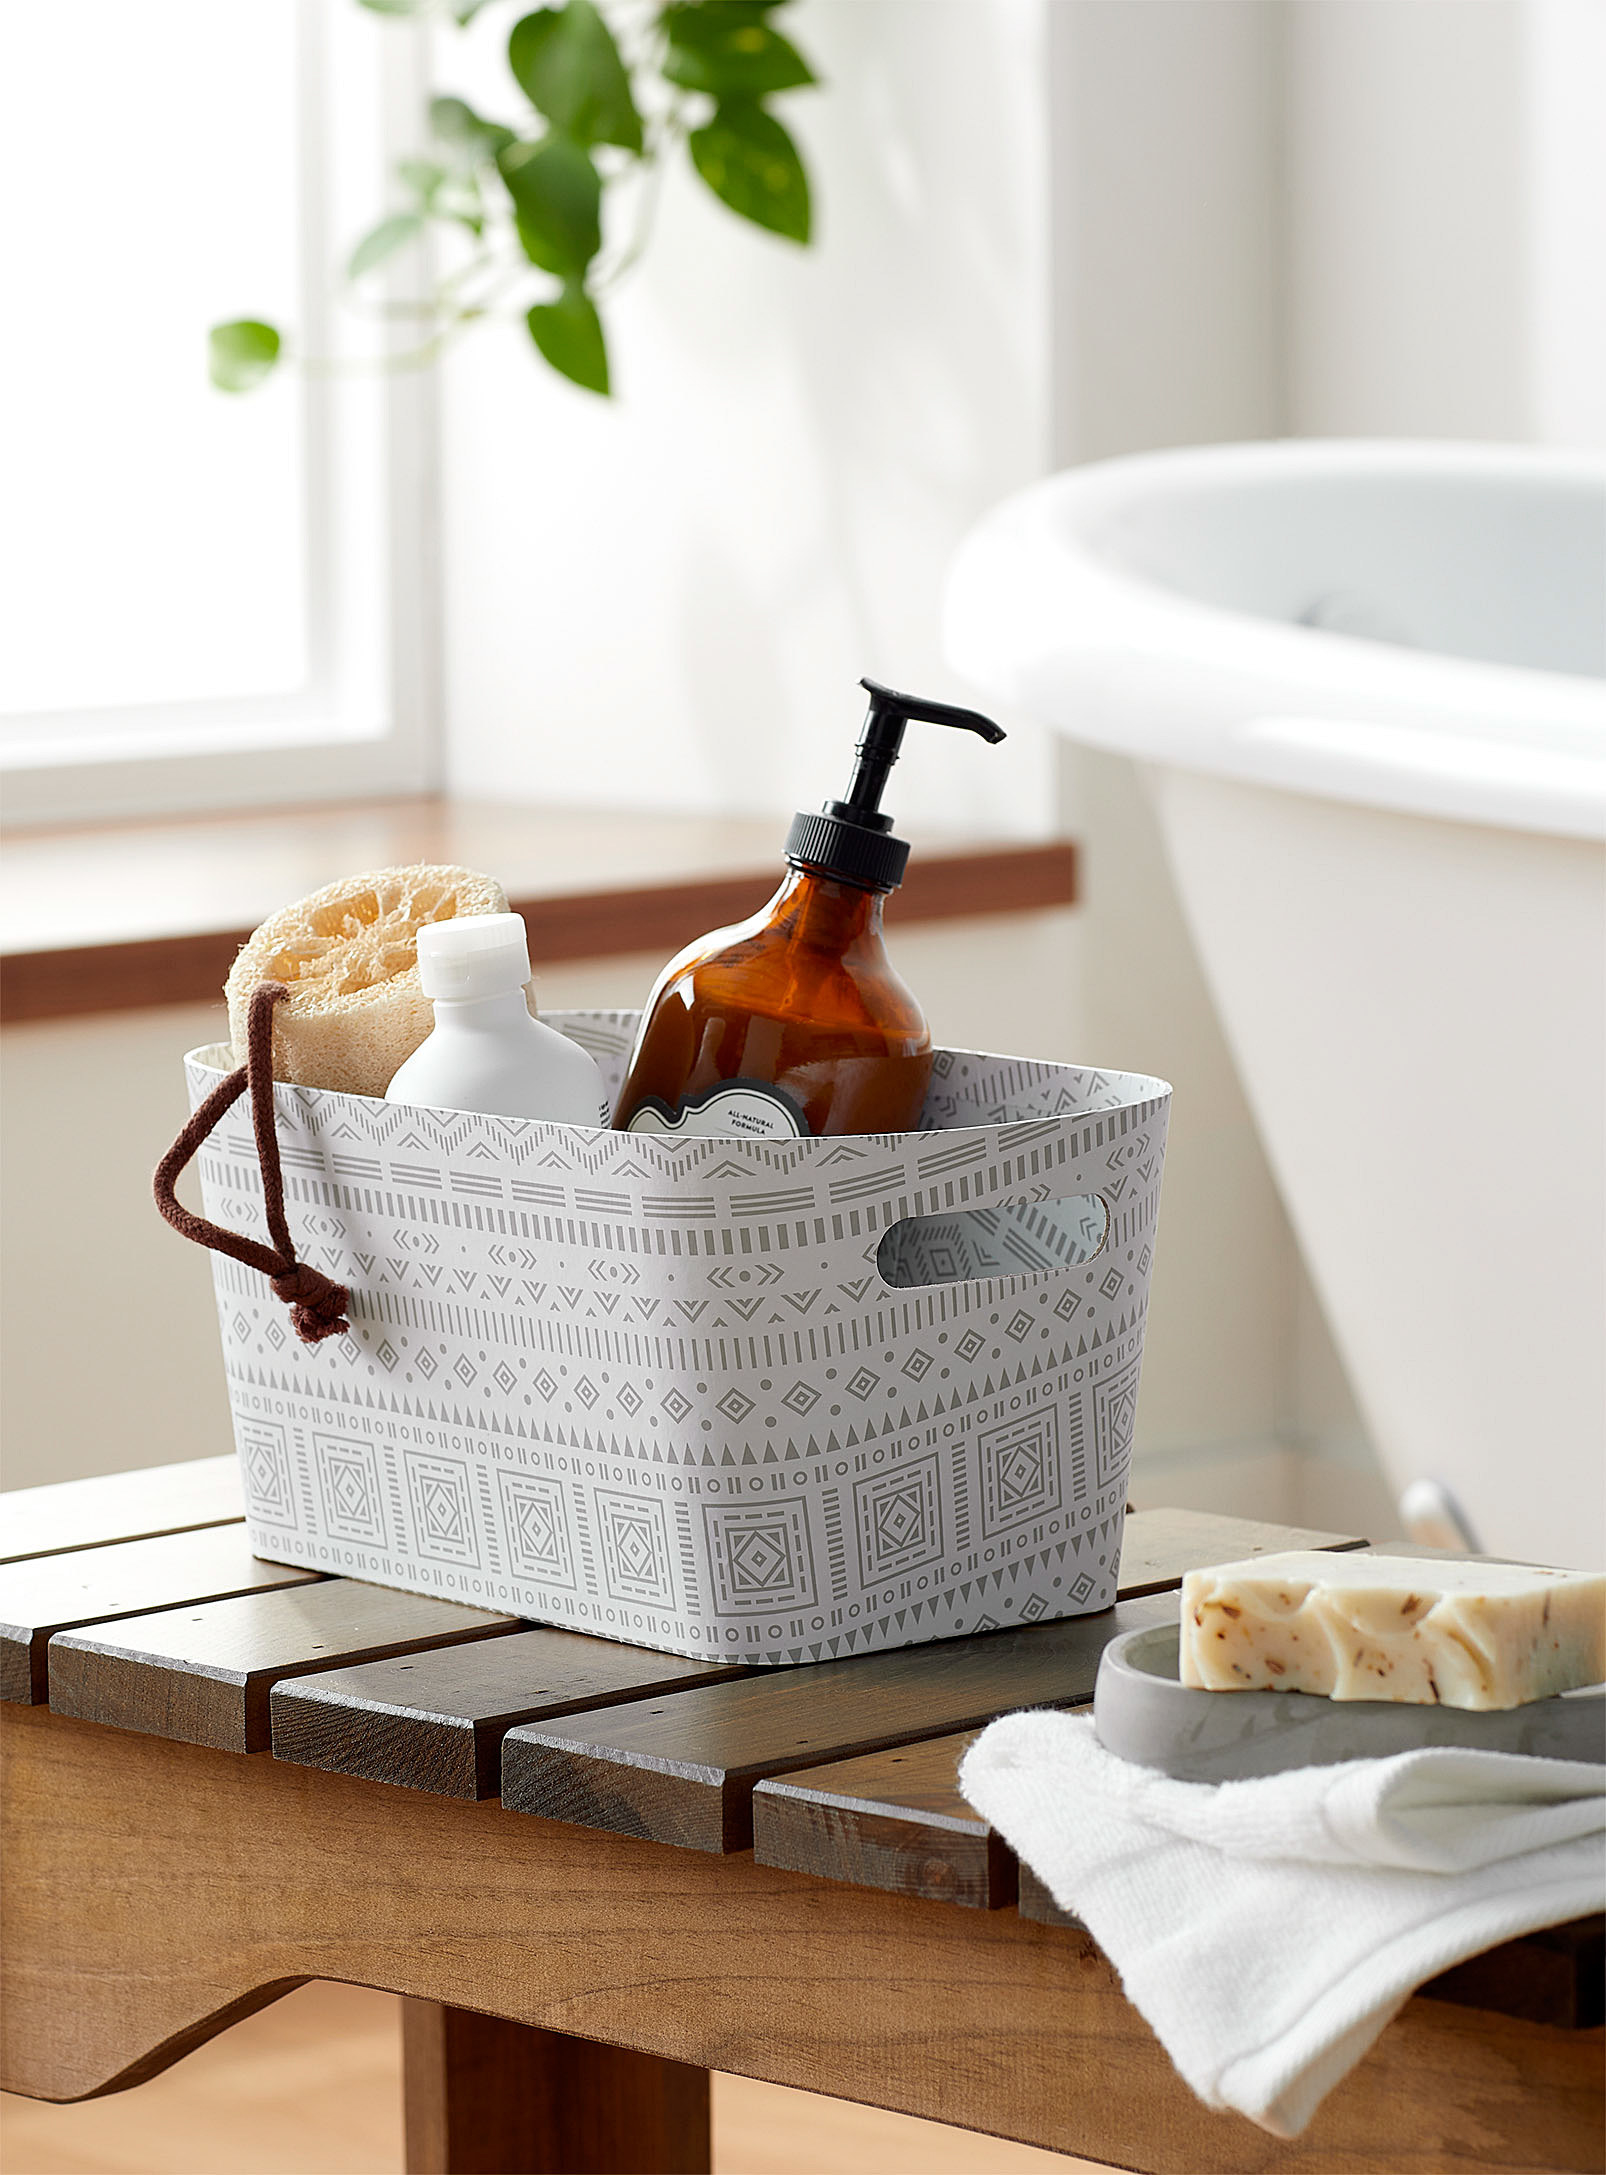 A cardboard basket filled with bathroom items like a sponge, soap, and body wash